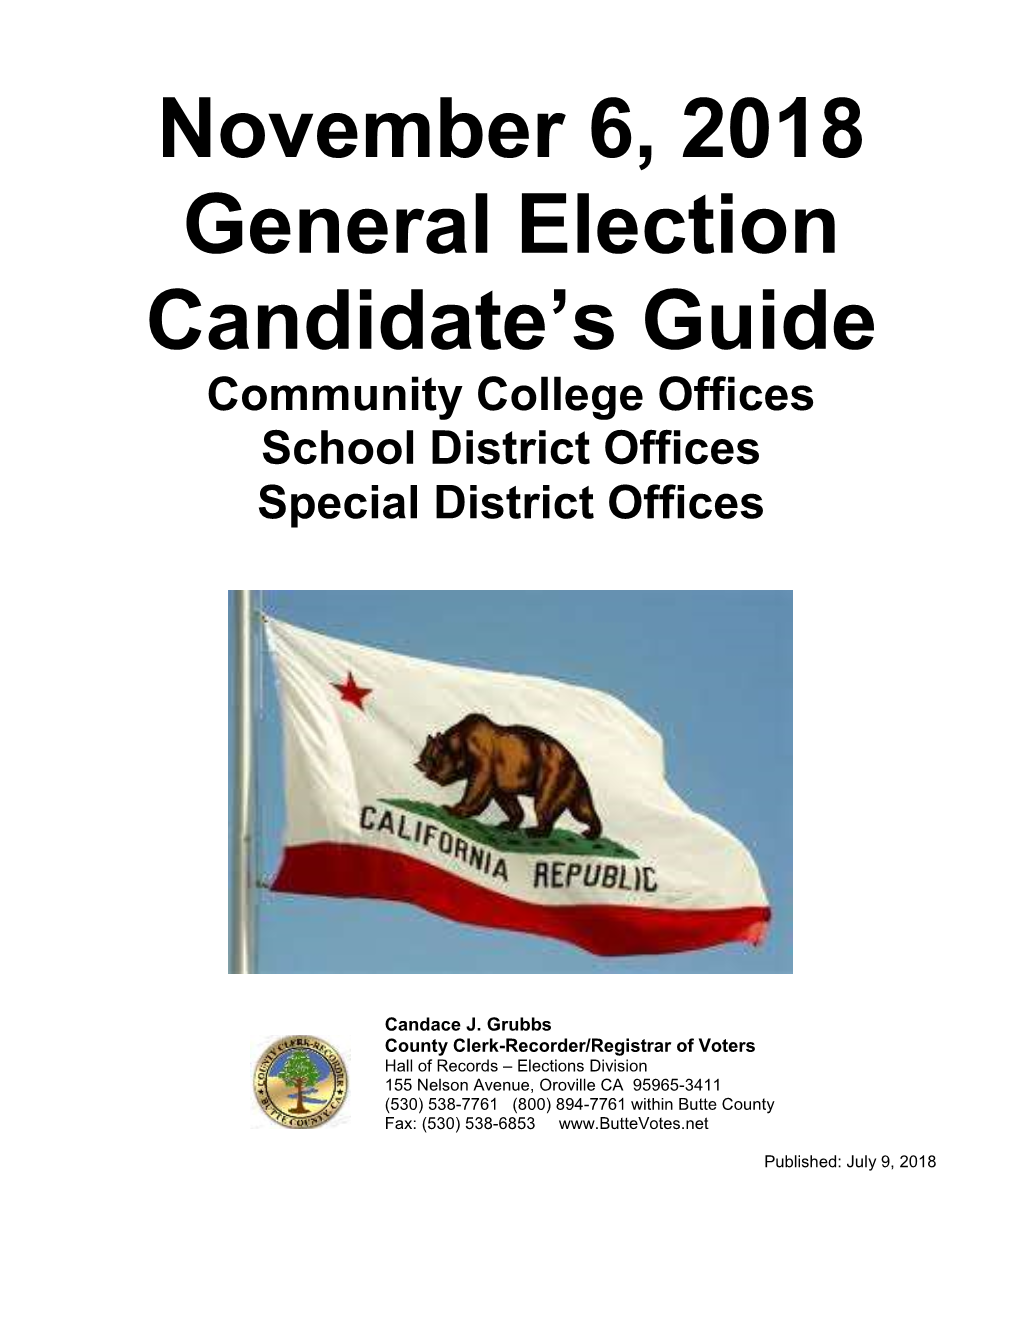 November 6, 2018 General Election Candidate's Guide